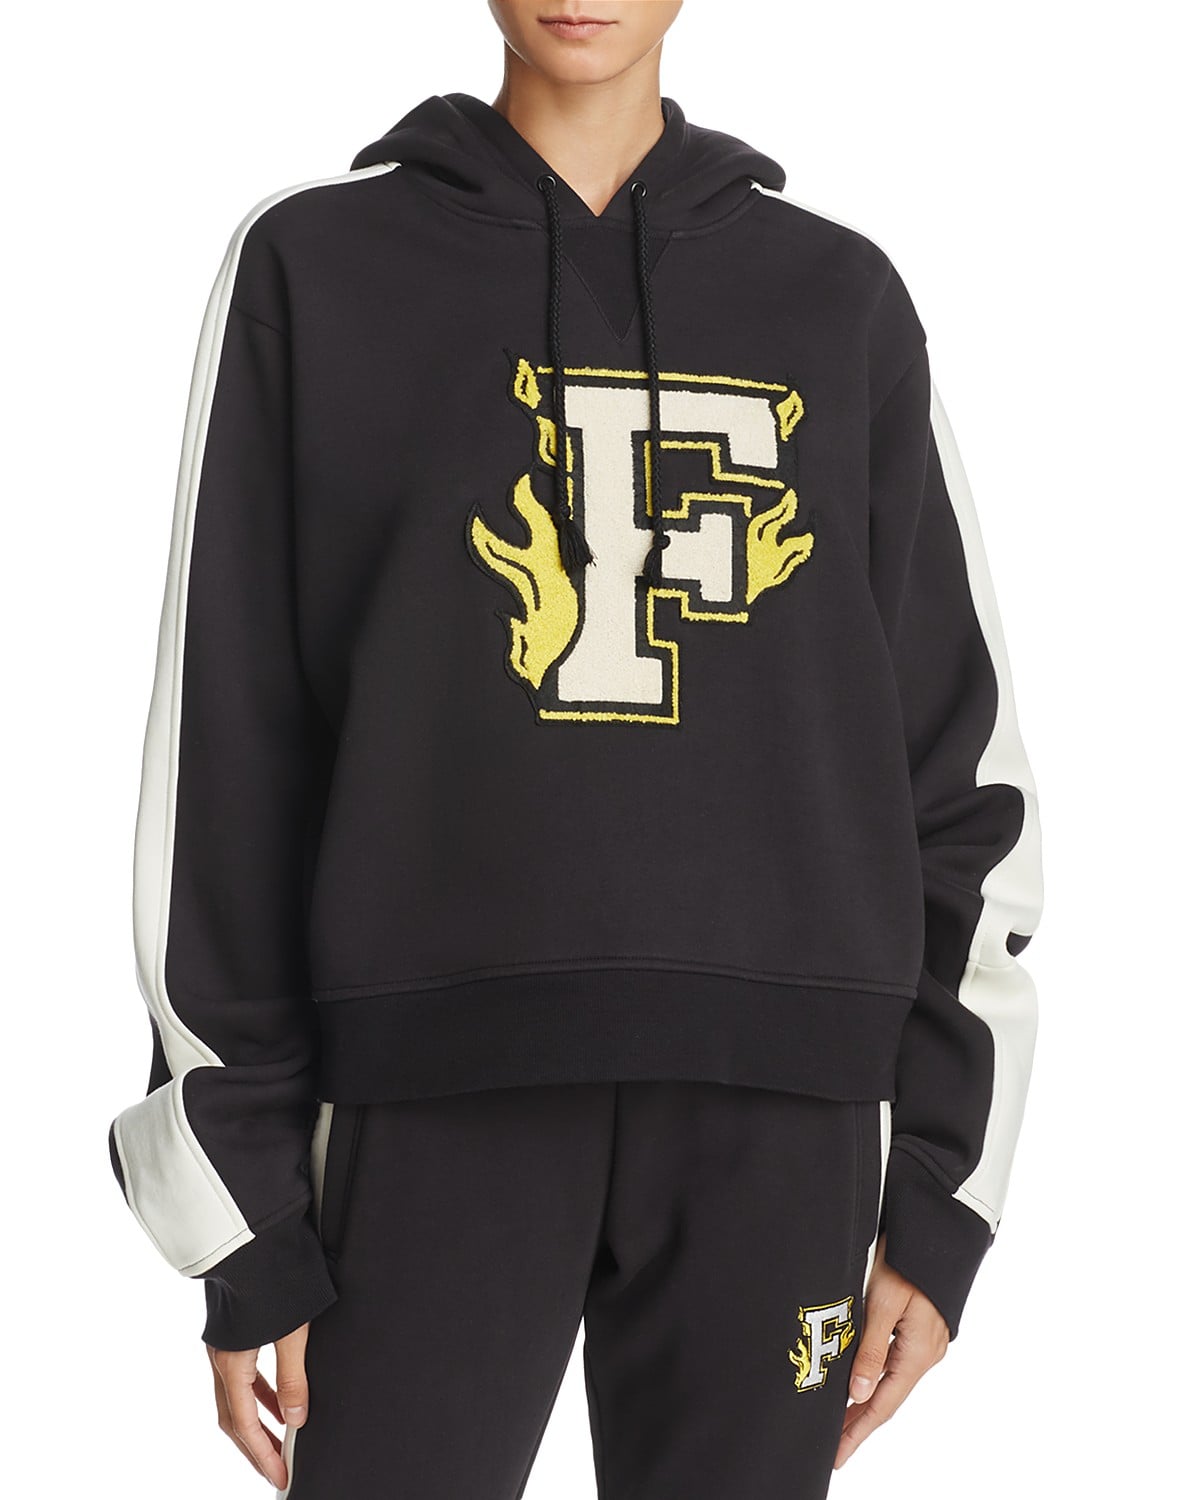 tentoonstelling Indica Giet Fenty Puma x Rihanna Hooded Panel Sweatshirt | Go Get Your Wallet Because  the Fenty x Puma Fall Collection Is a Beauty | POPSUGAR Fashion Photo 6